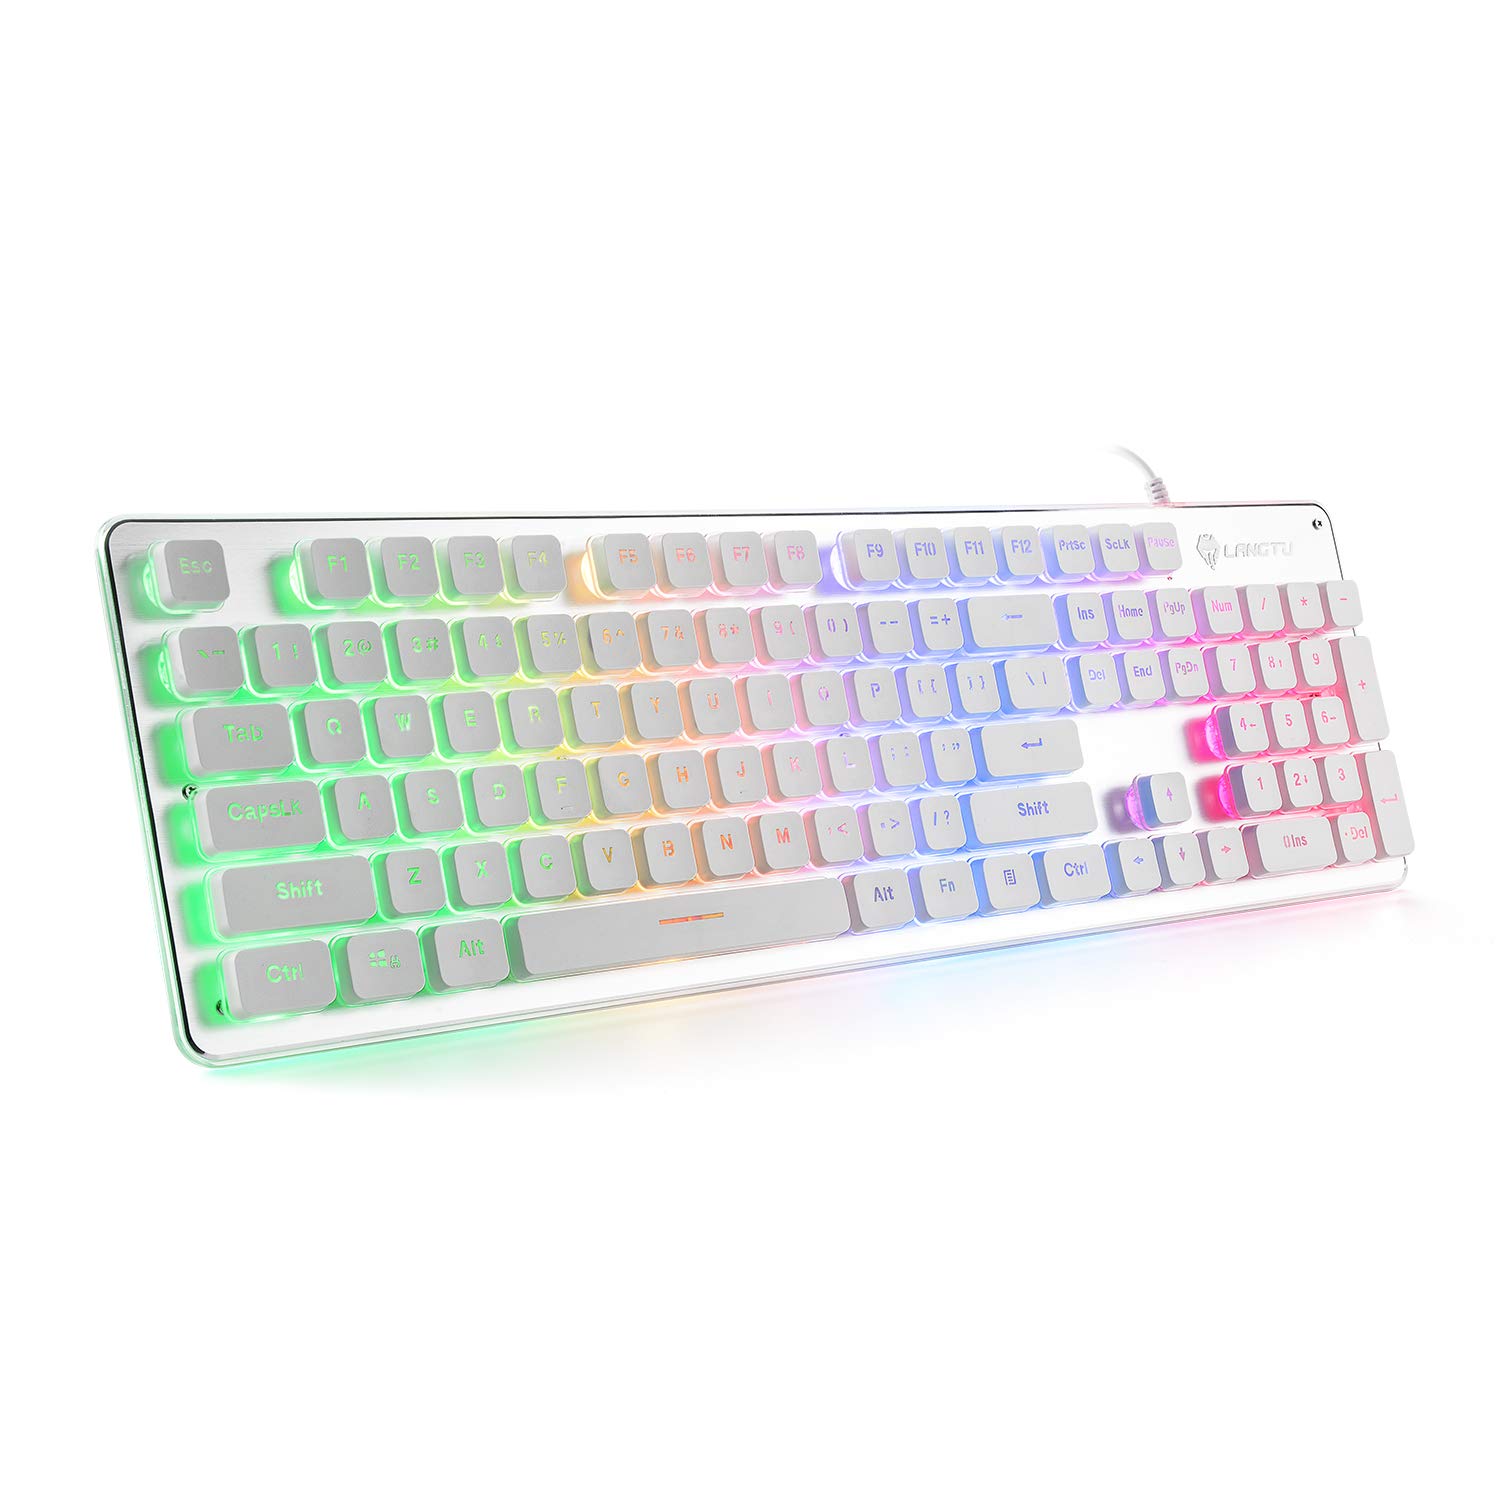 Book Cover LANGTU Membrane Gaming Keyboard, Rainbow LED Backlit Quiet Keyboard for Office, USB Wired All-Metal Panel 25 Keys Anti-ghosting Computer Keyboard 104 Keys - L1 White/Silver…